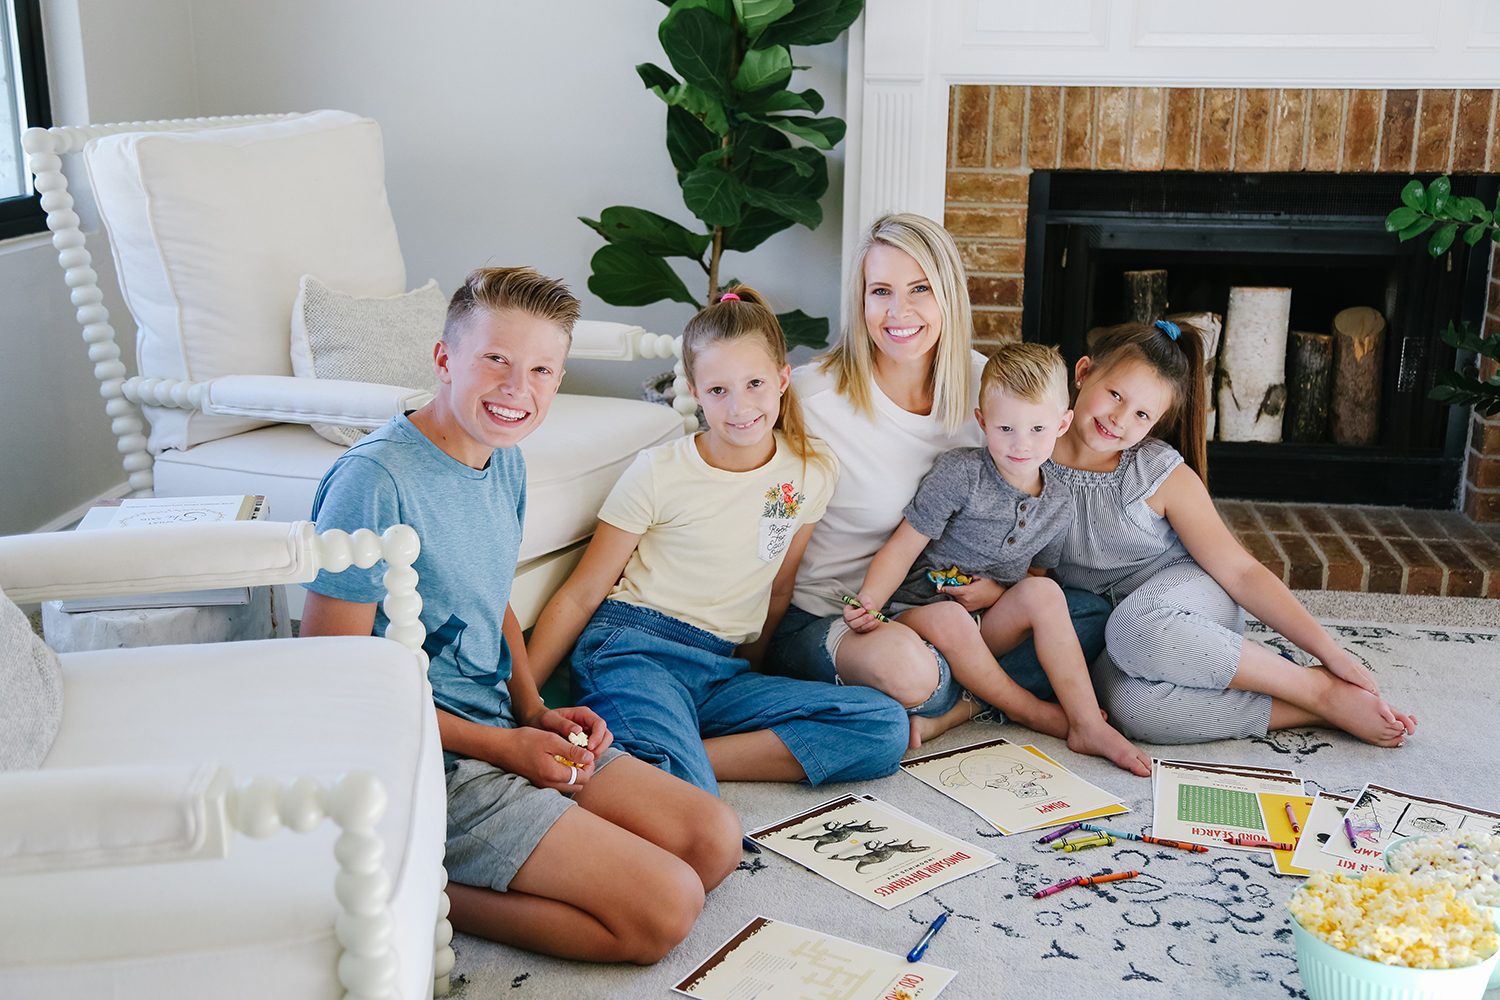 Family Fun Night at Home ideas featured by Utah lifestyle blogger, By Jen Rose